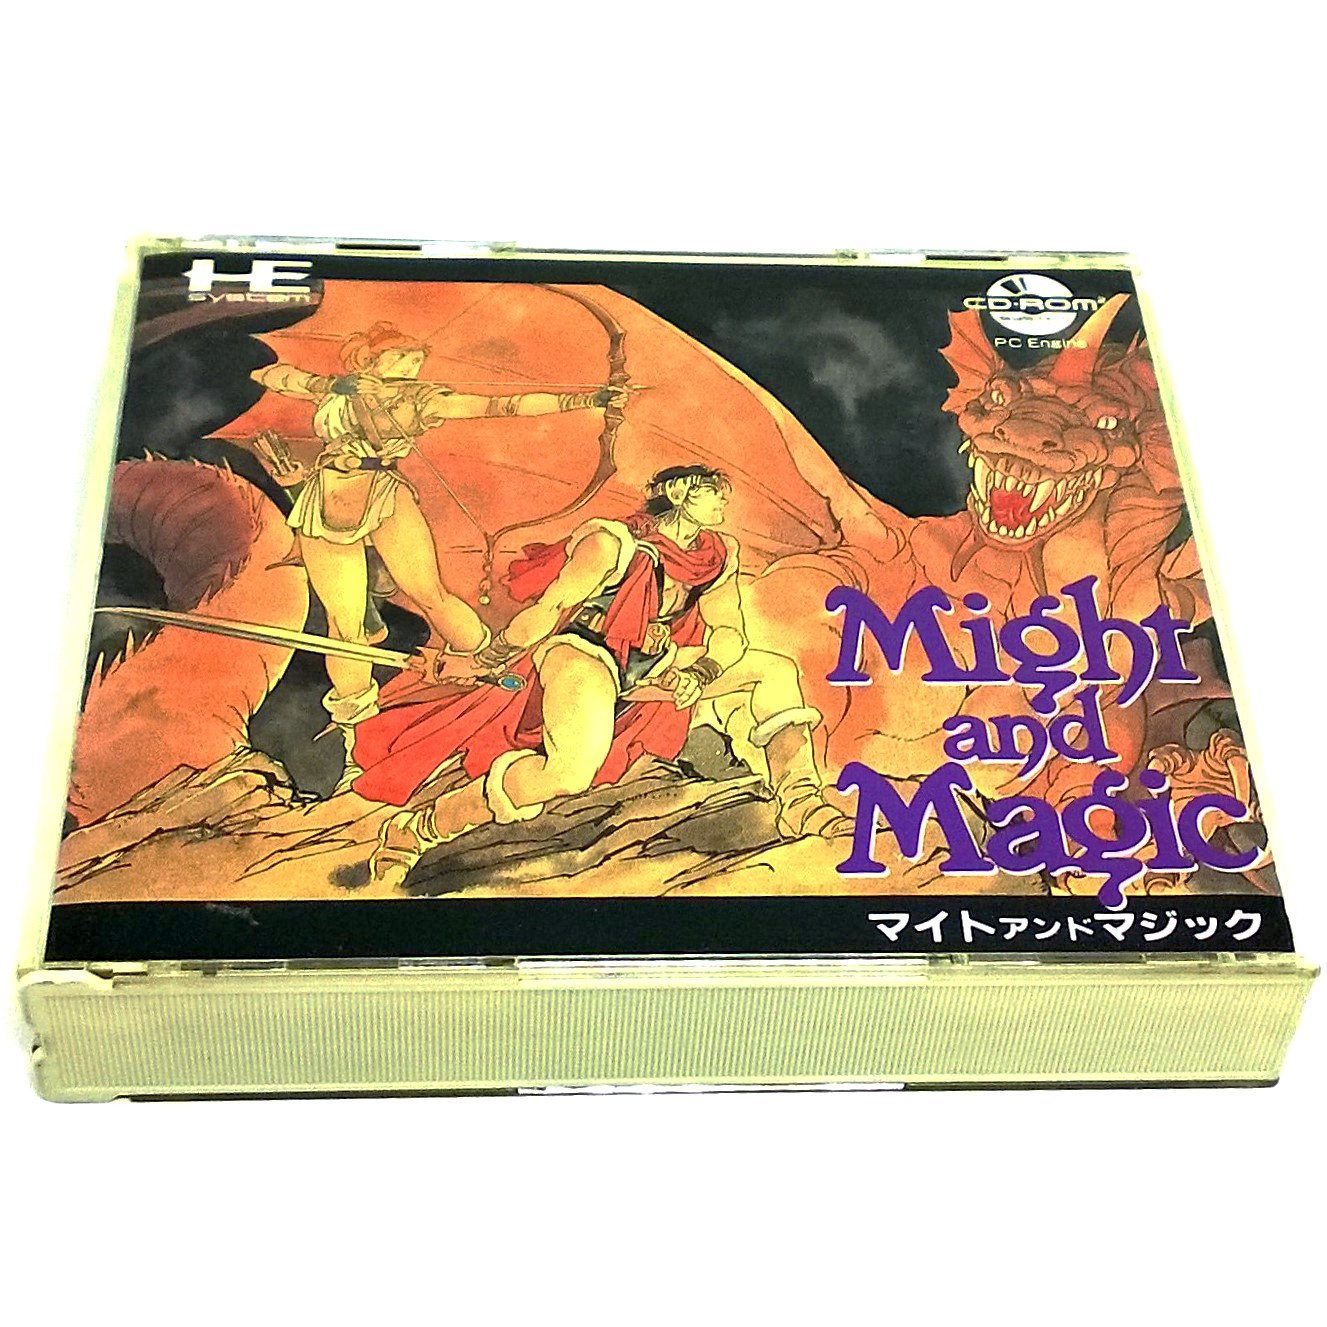 Might and Magic for PC Engine - Front of case